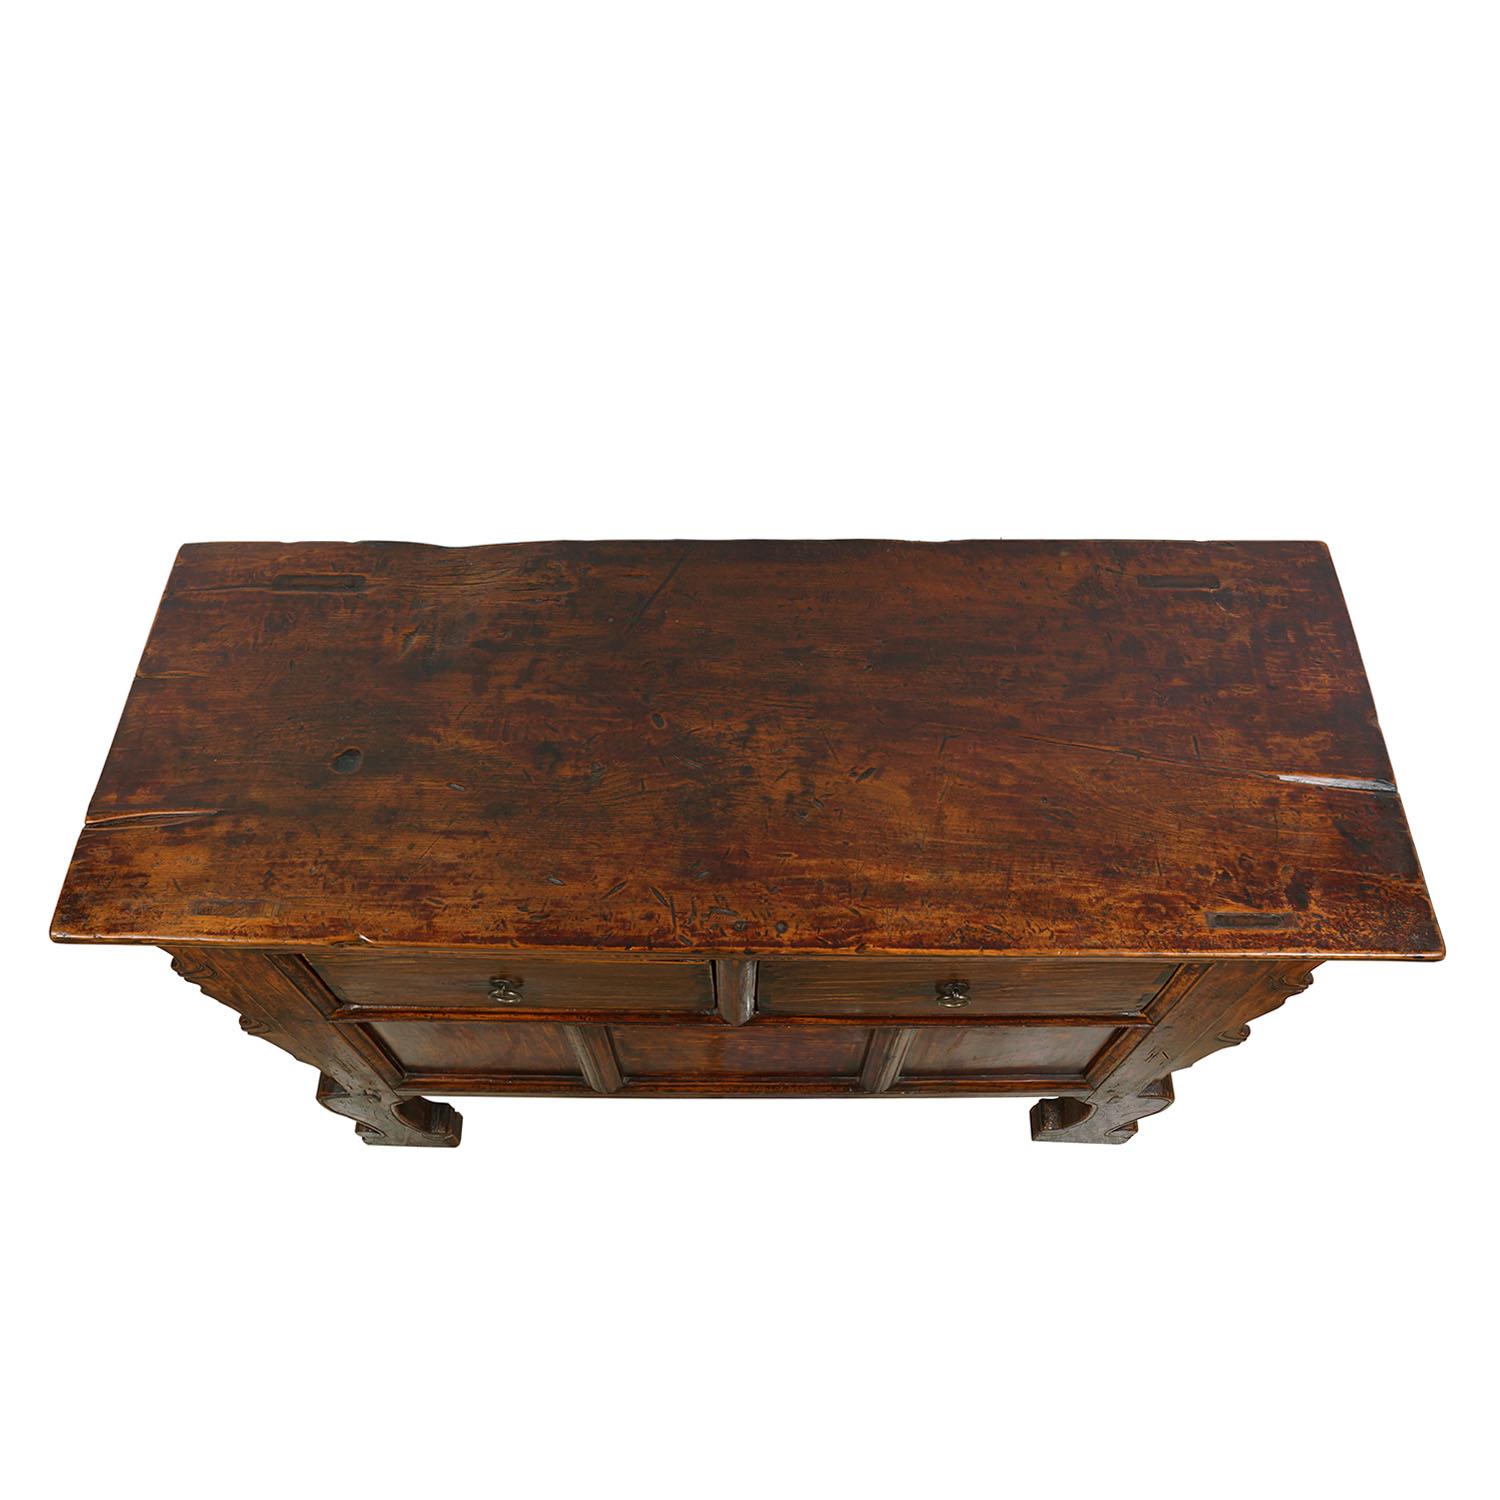 19th Century Antique Chinese Credenza, Sideboard, Buffet Table For Sale 2